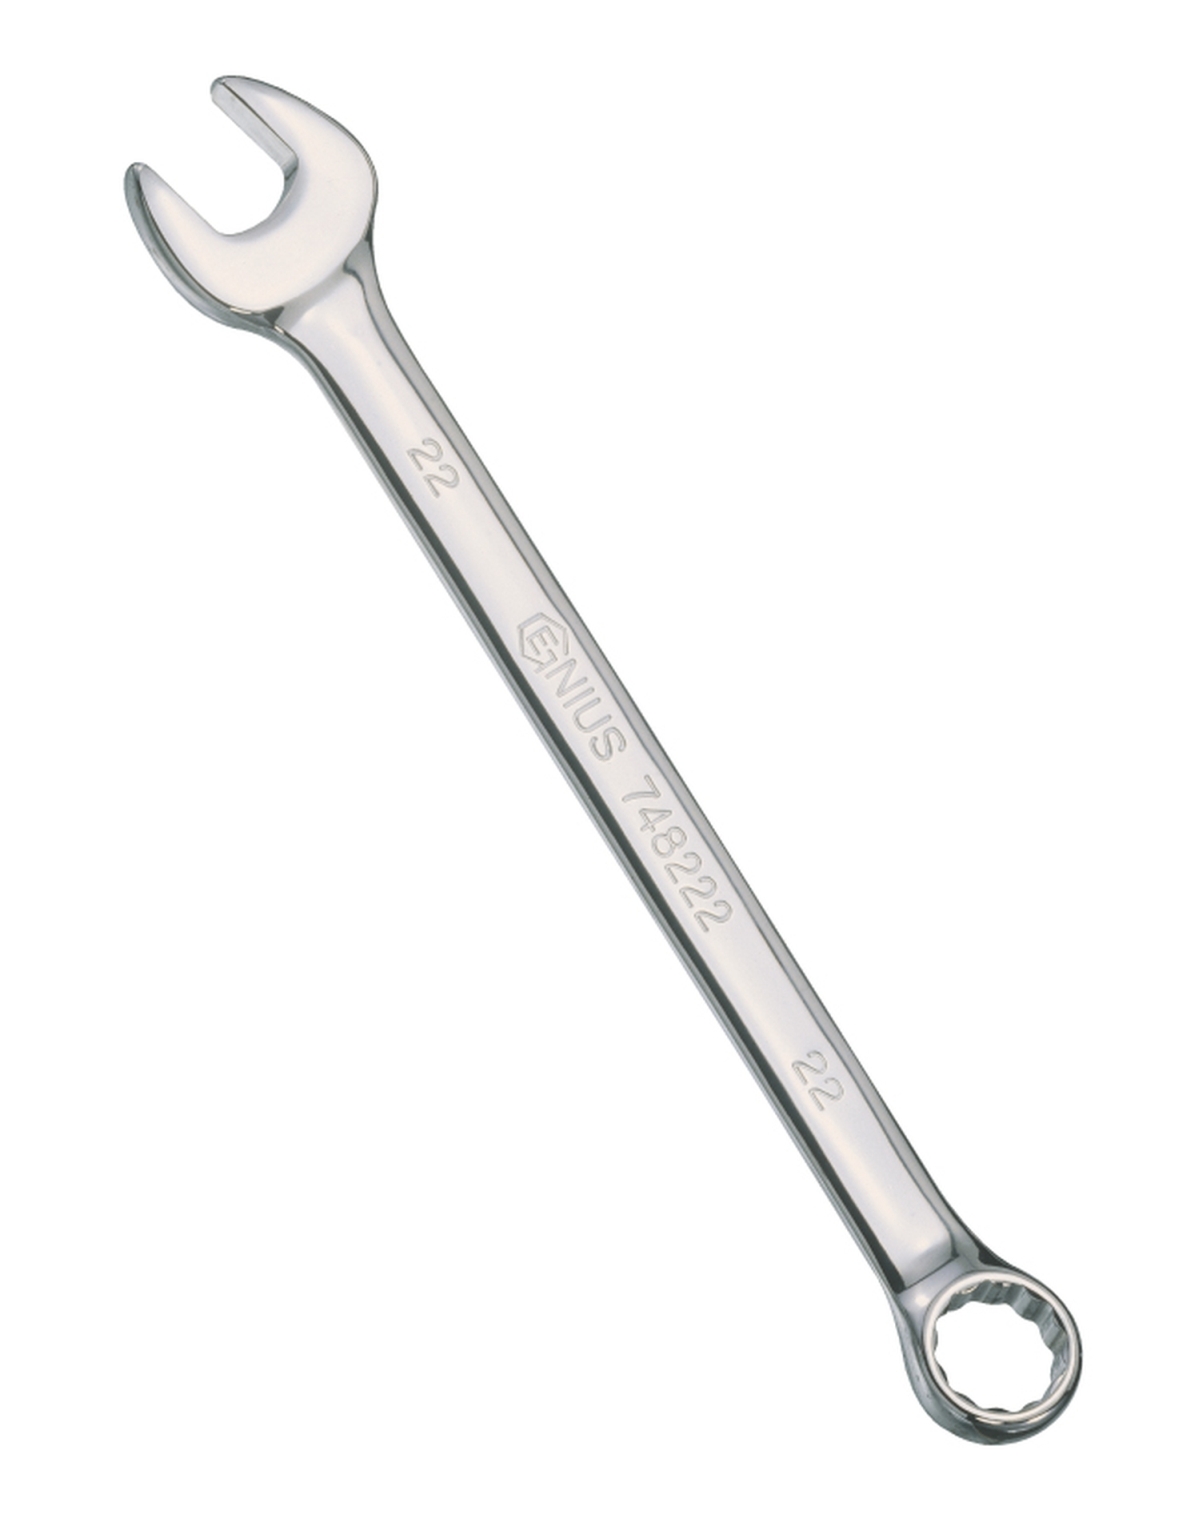 Combination Wrench 8mm